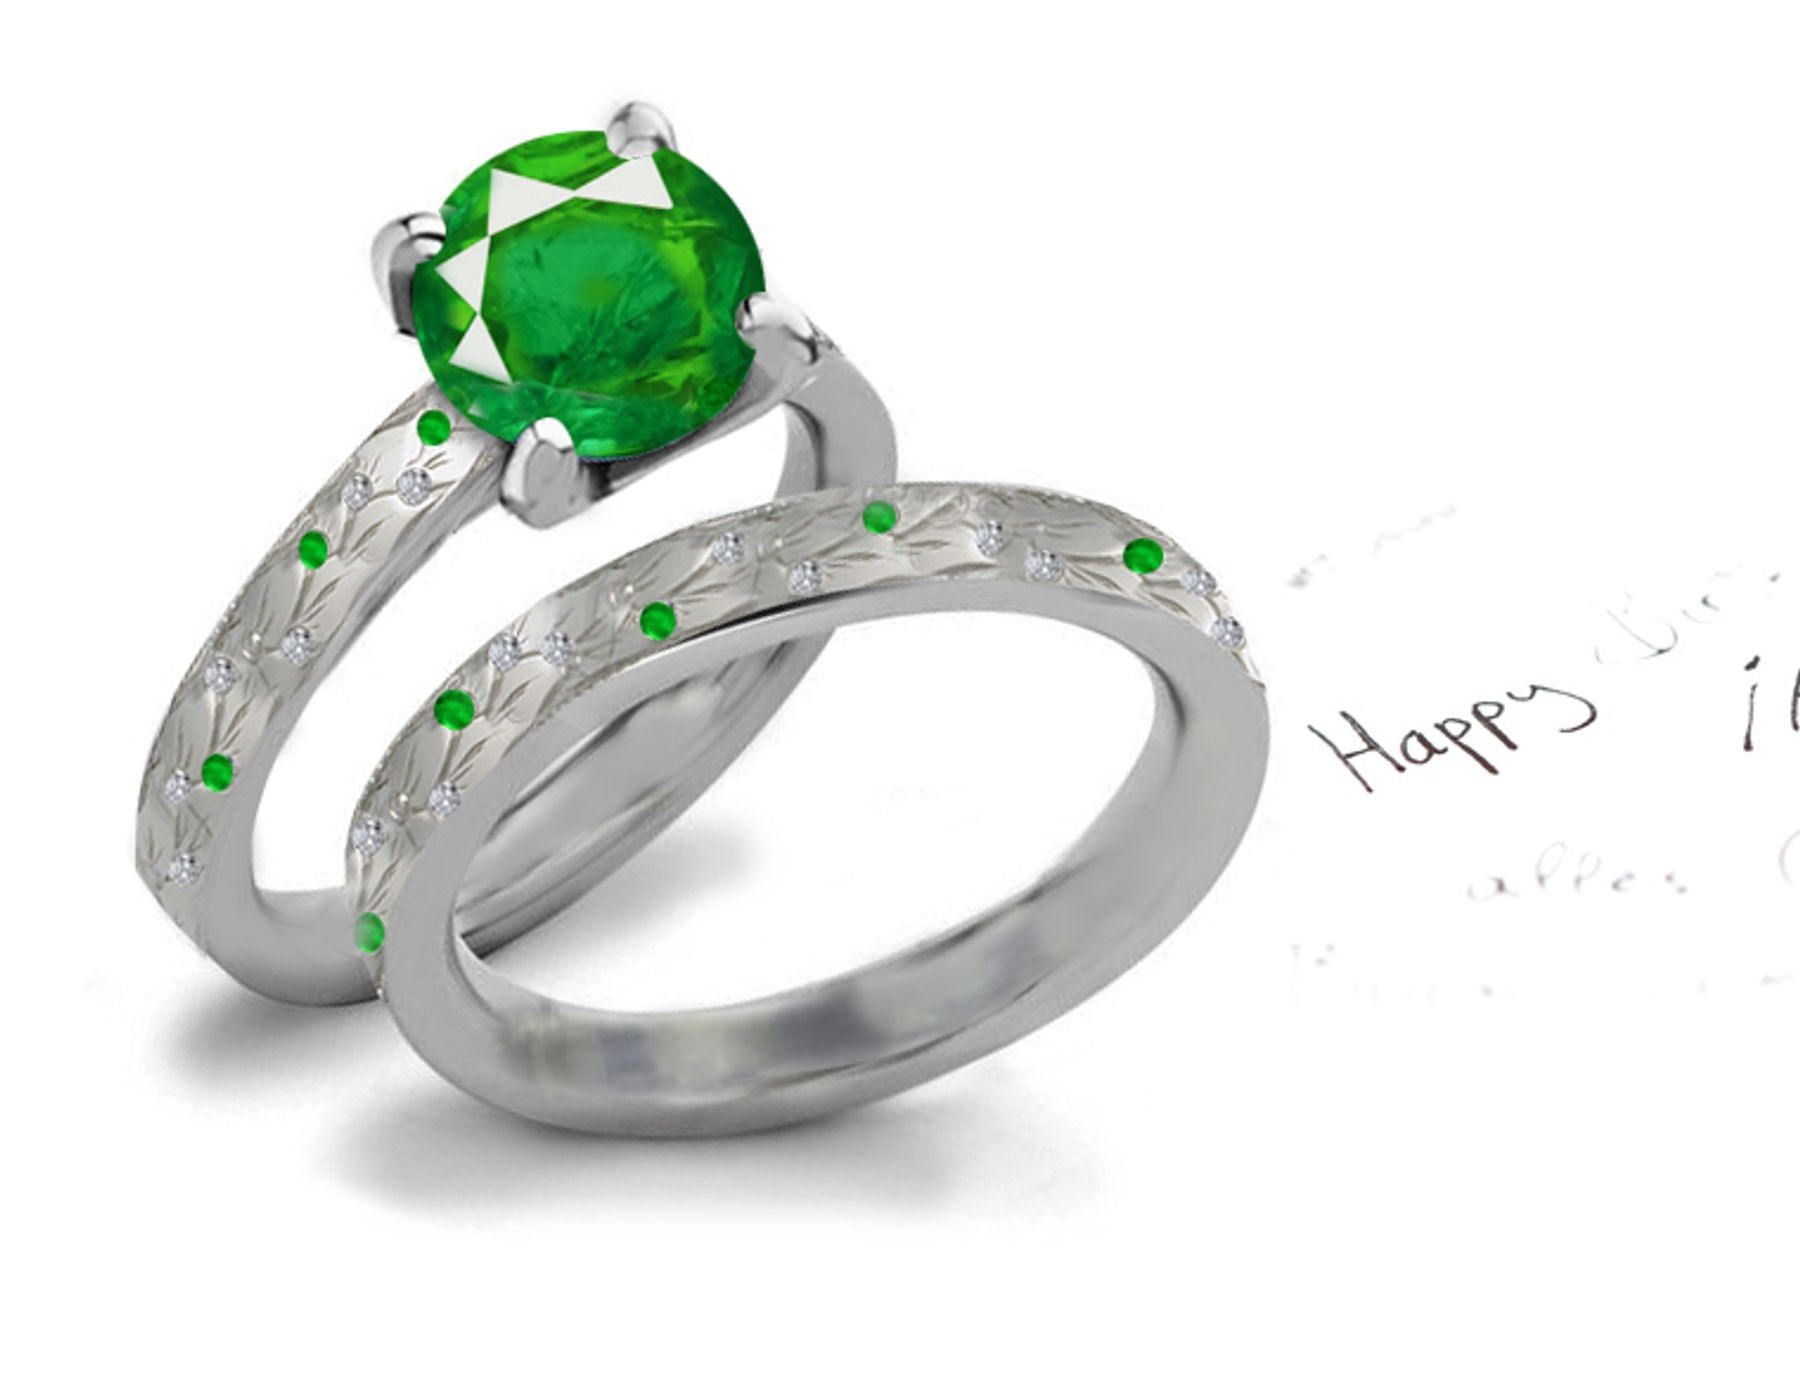 English-French Creations:Gleaming Burnish Set Emerald Ring With Diamonds in 14k White Gold 